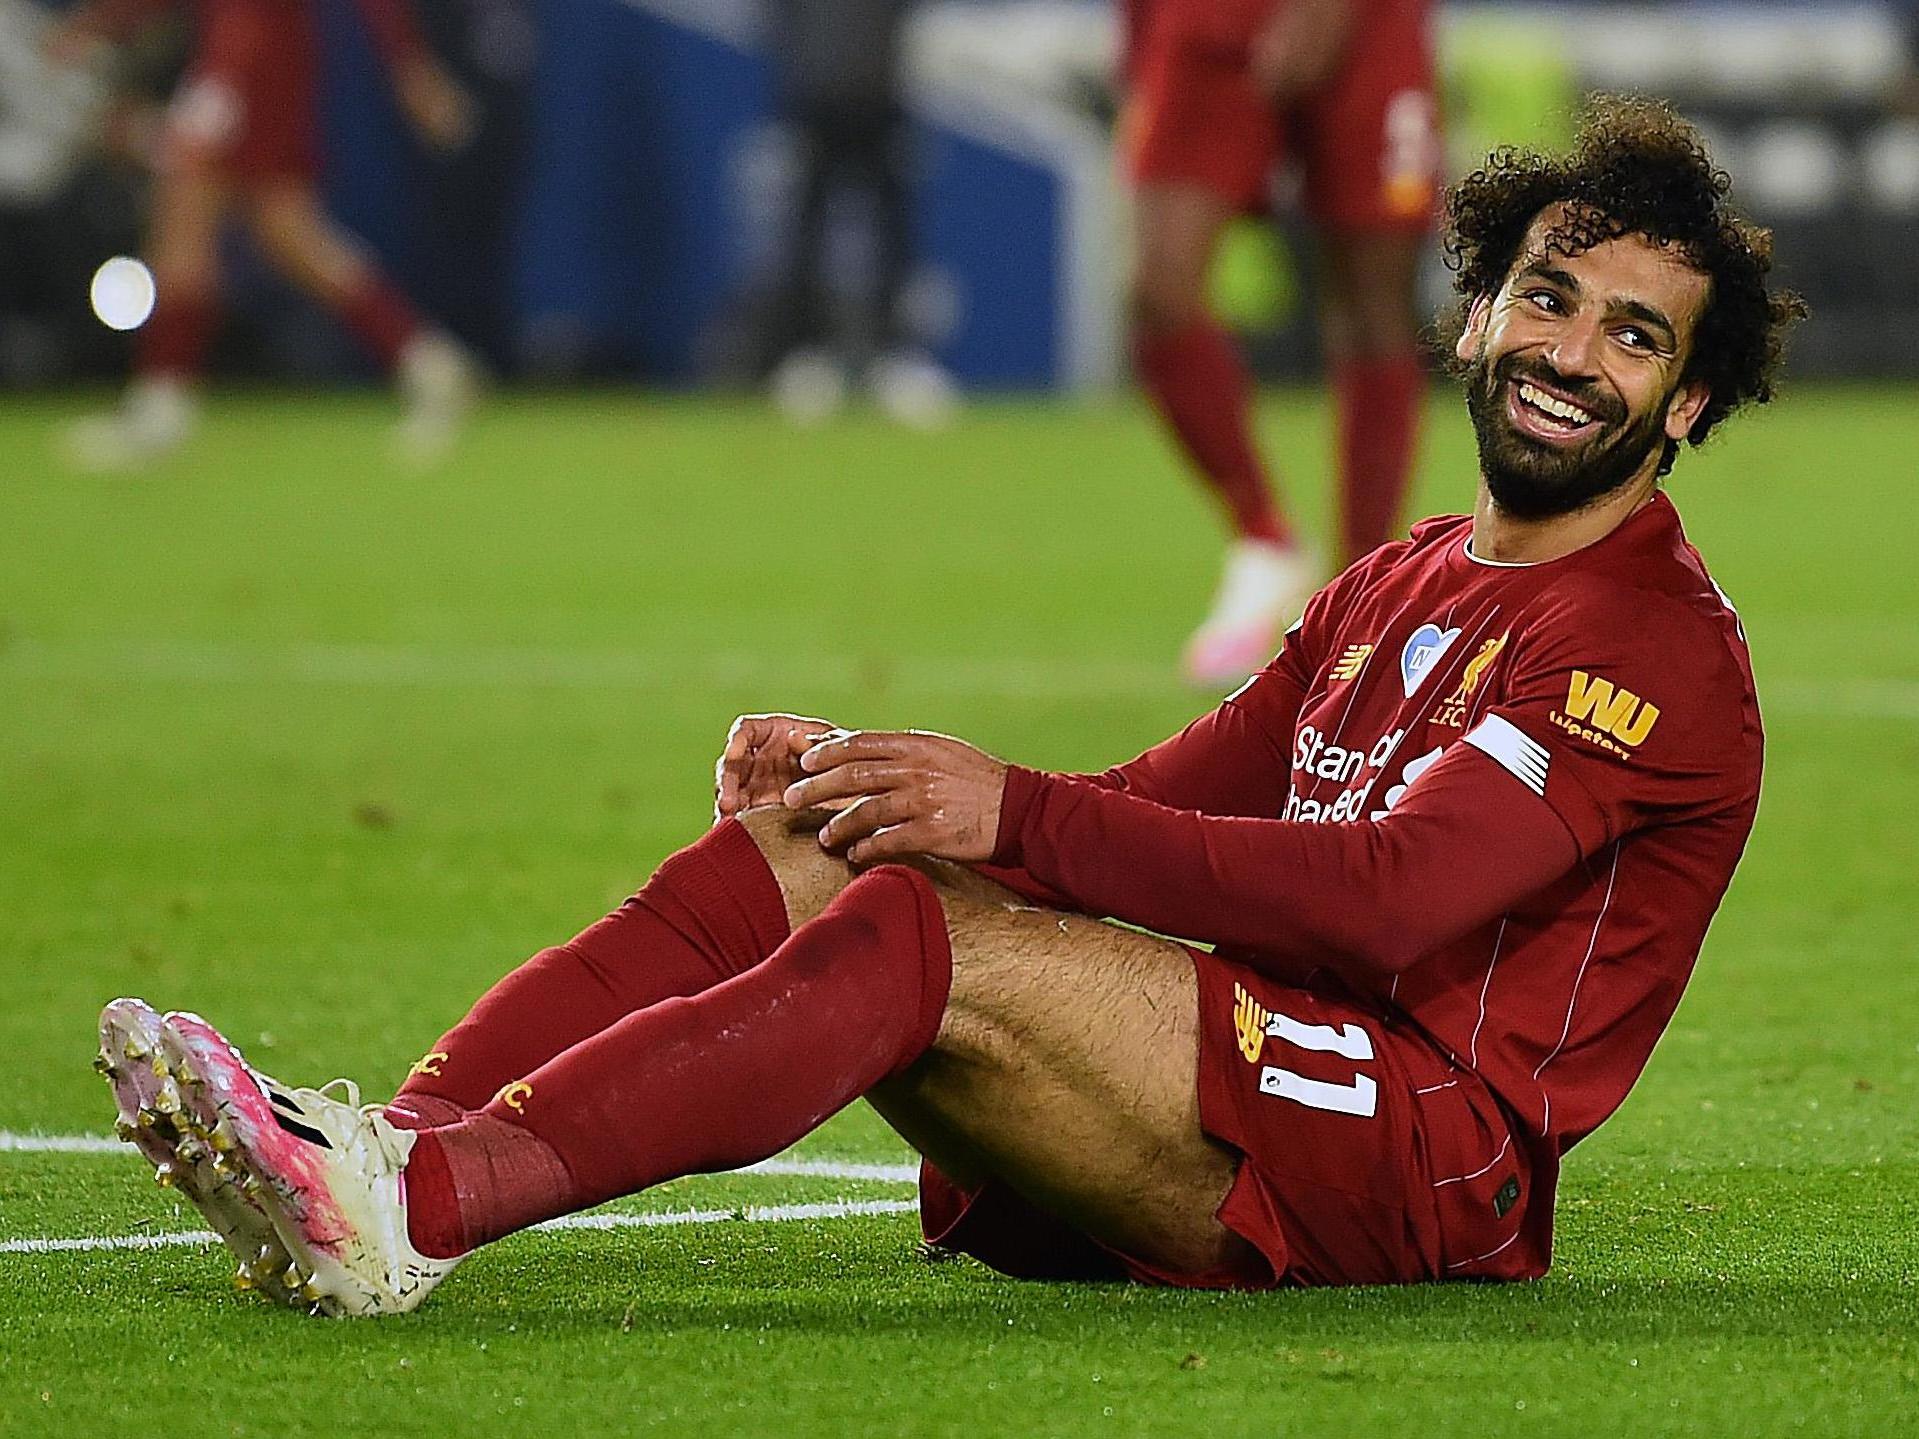 Mohamed Salah netted twice in Liverpool's win over Brighton